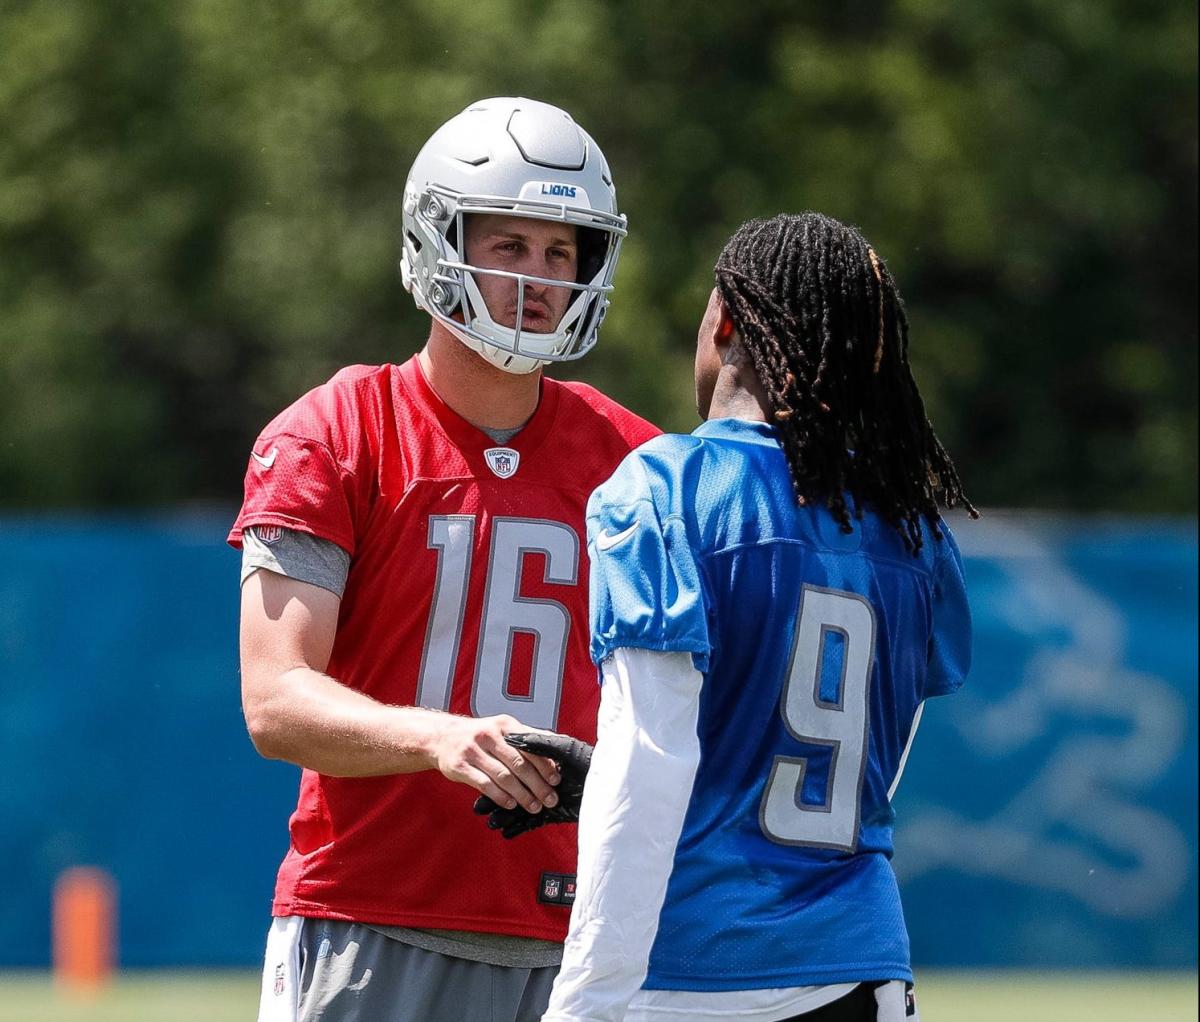 Detroit's rookies impress, and more observations from Week 1 of